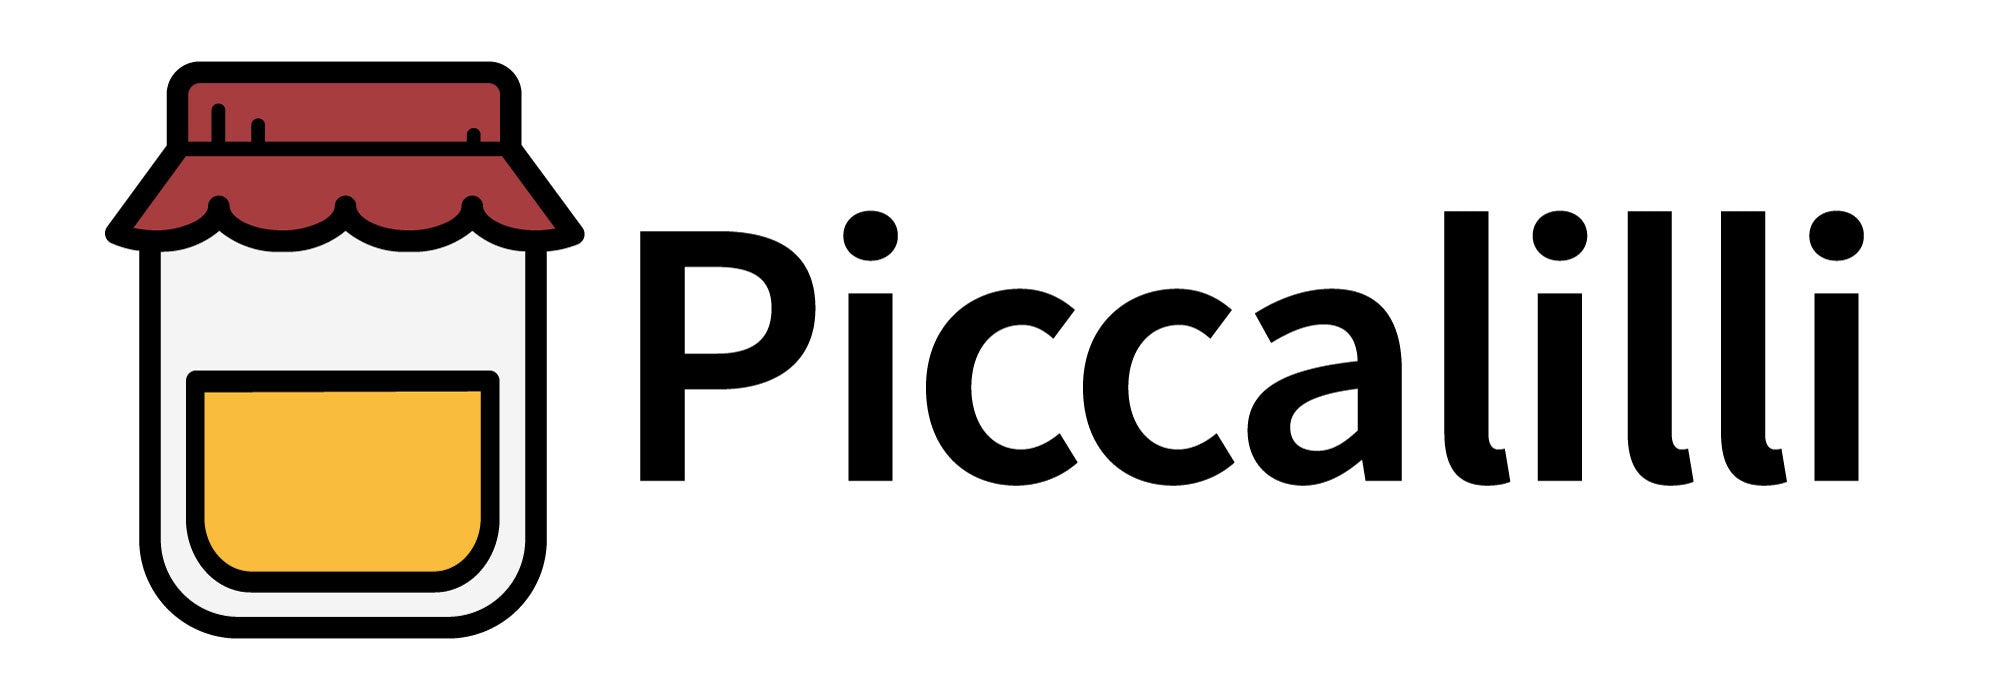 The old logo which is a yellow and red jar with “Piccalilli” written next to it